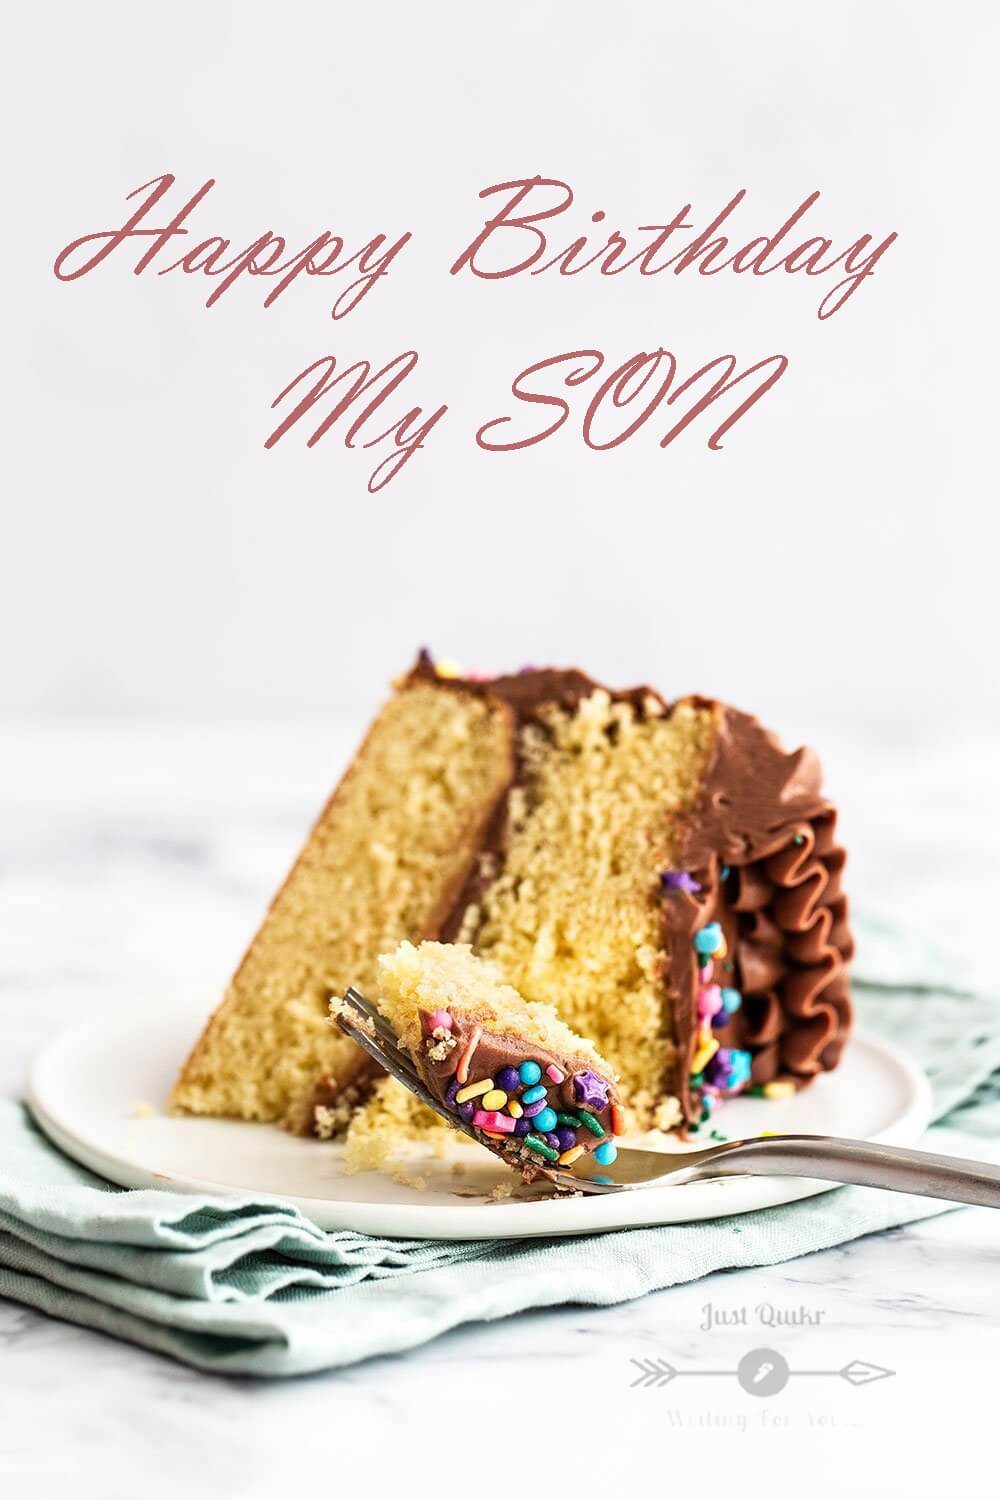 Top 10 : Special Unique Happy Birthday Cake HD Pics Images for My Son |  Just Quikr presents birthday wishes, festivals, education